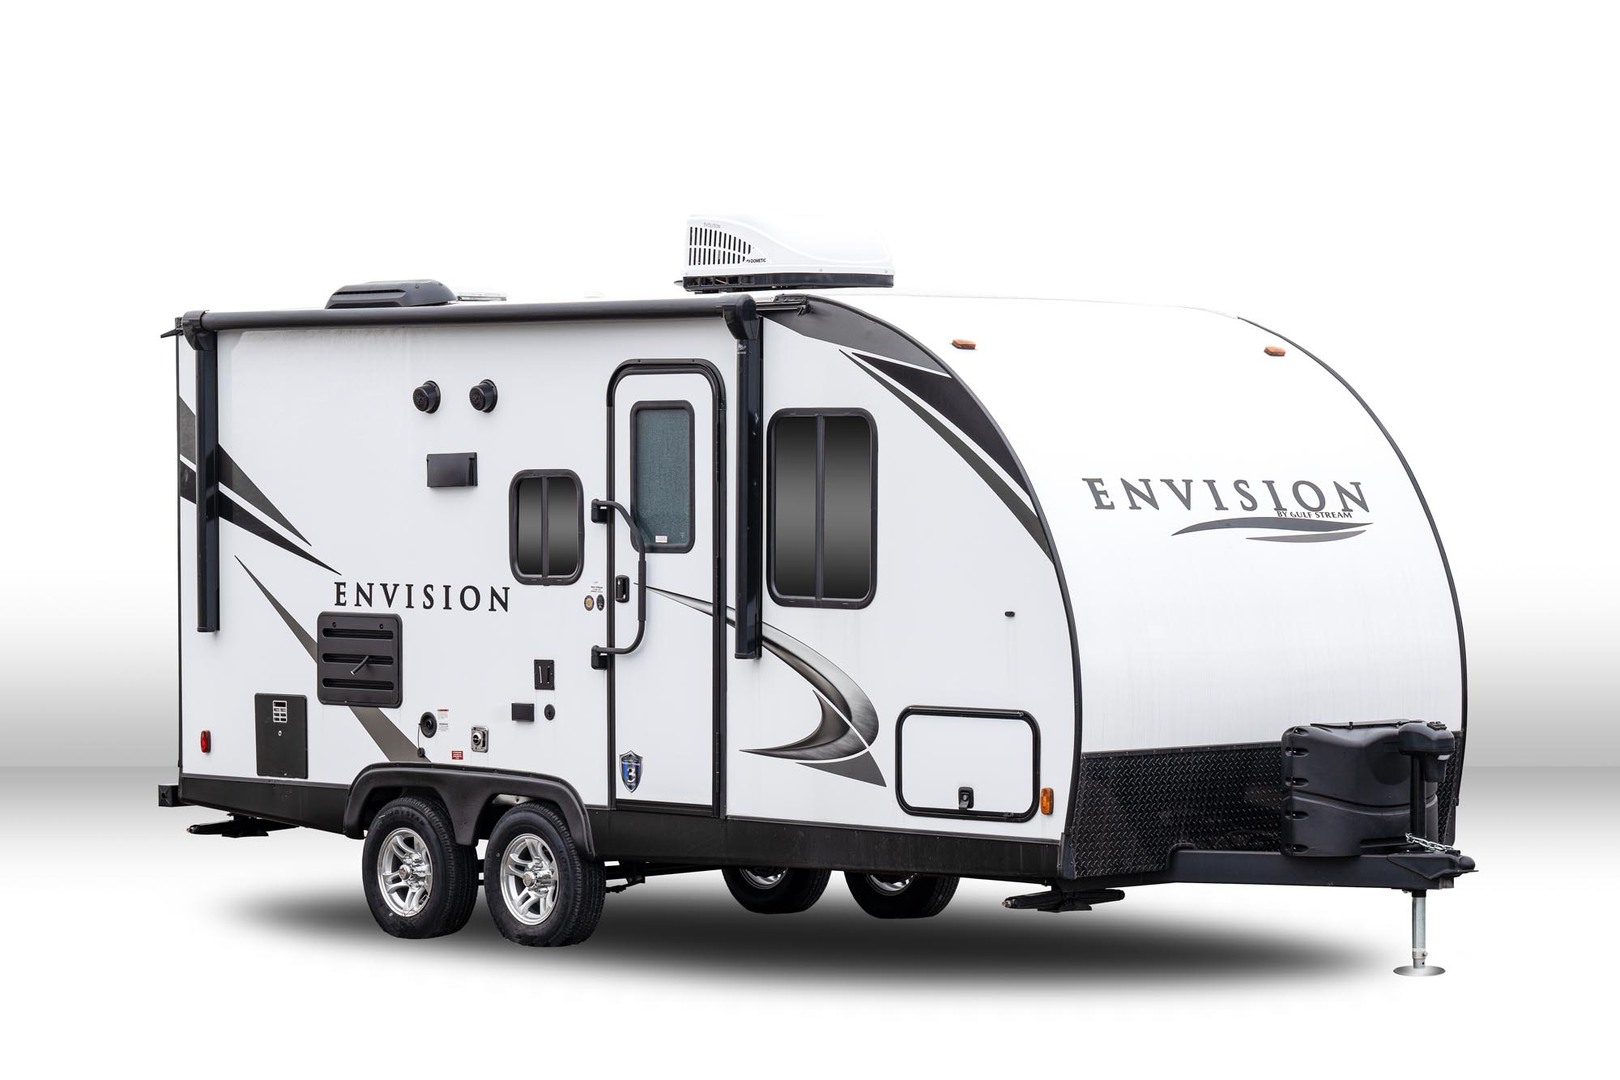 Gulf Stream Envision 21QBS Image